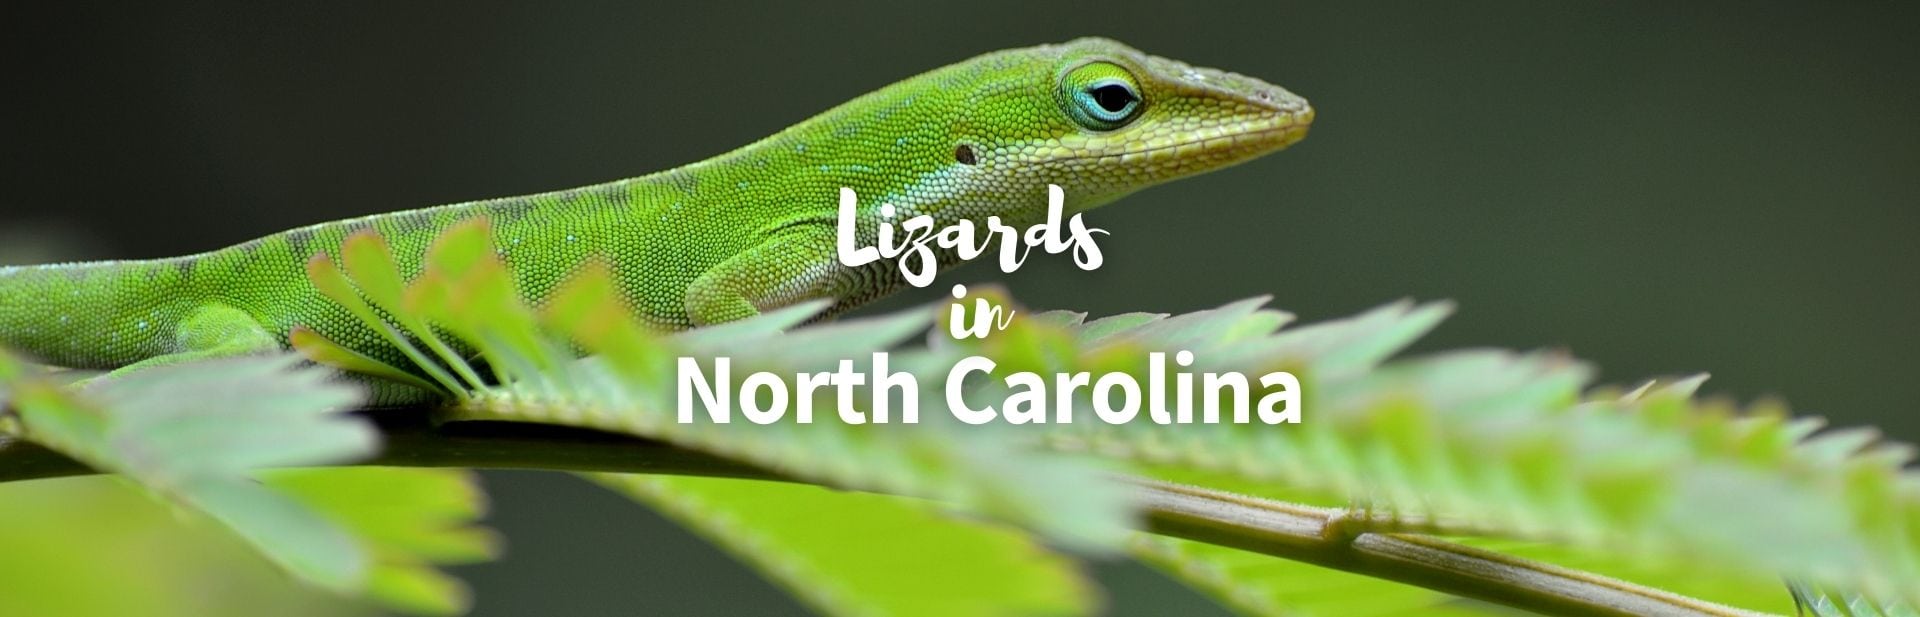 13 Species of Lizards in North Carolina: Facts and Detailed Pictures!